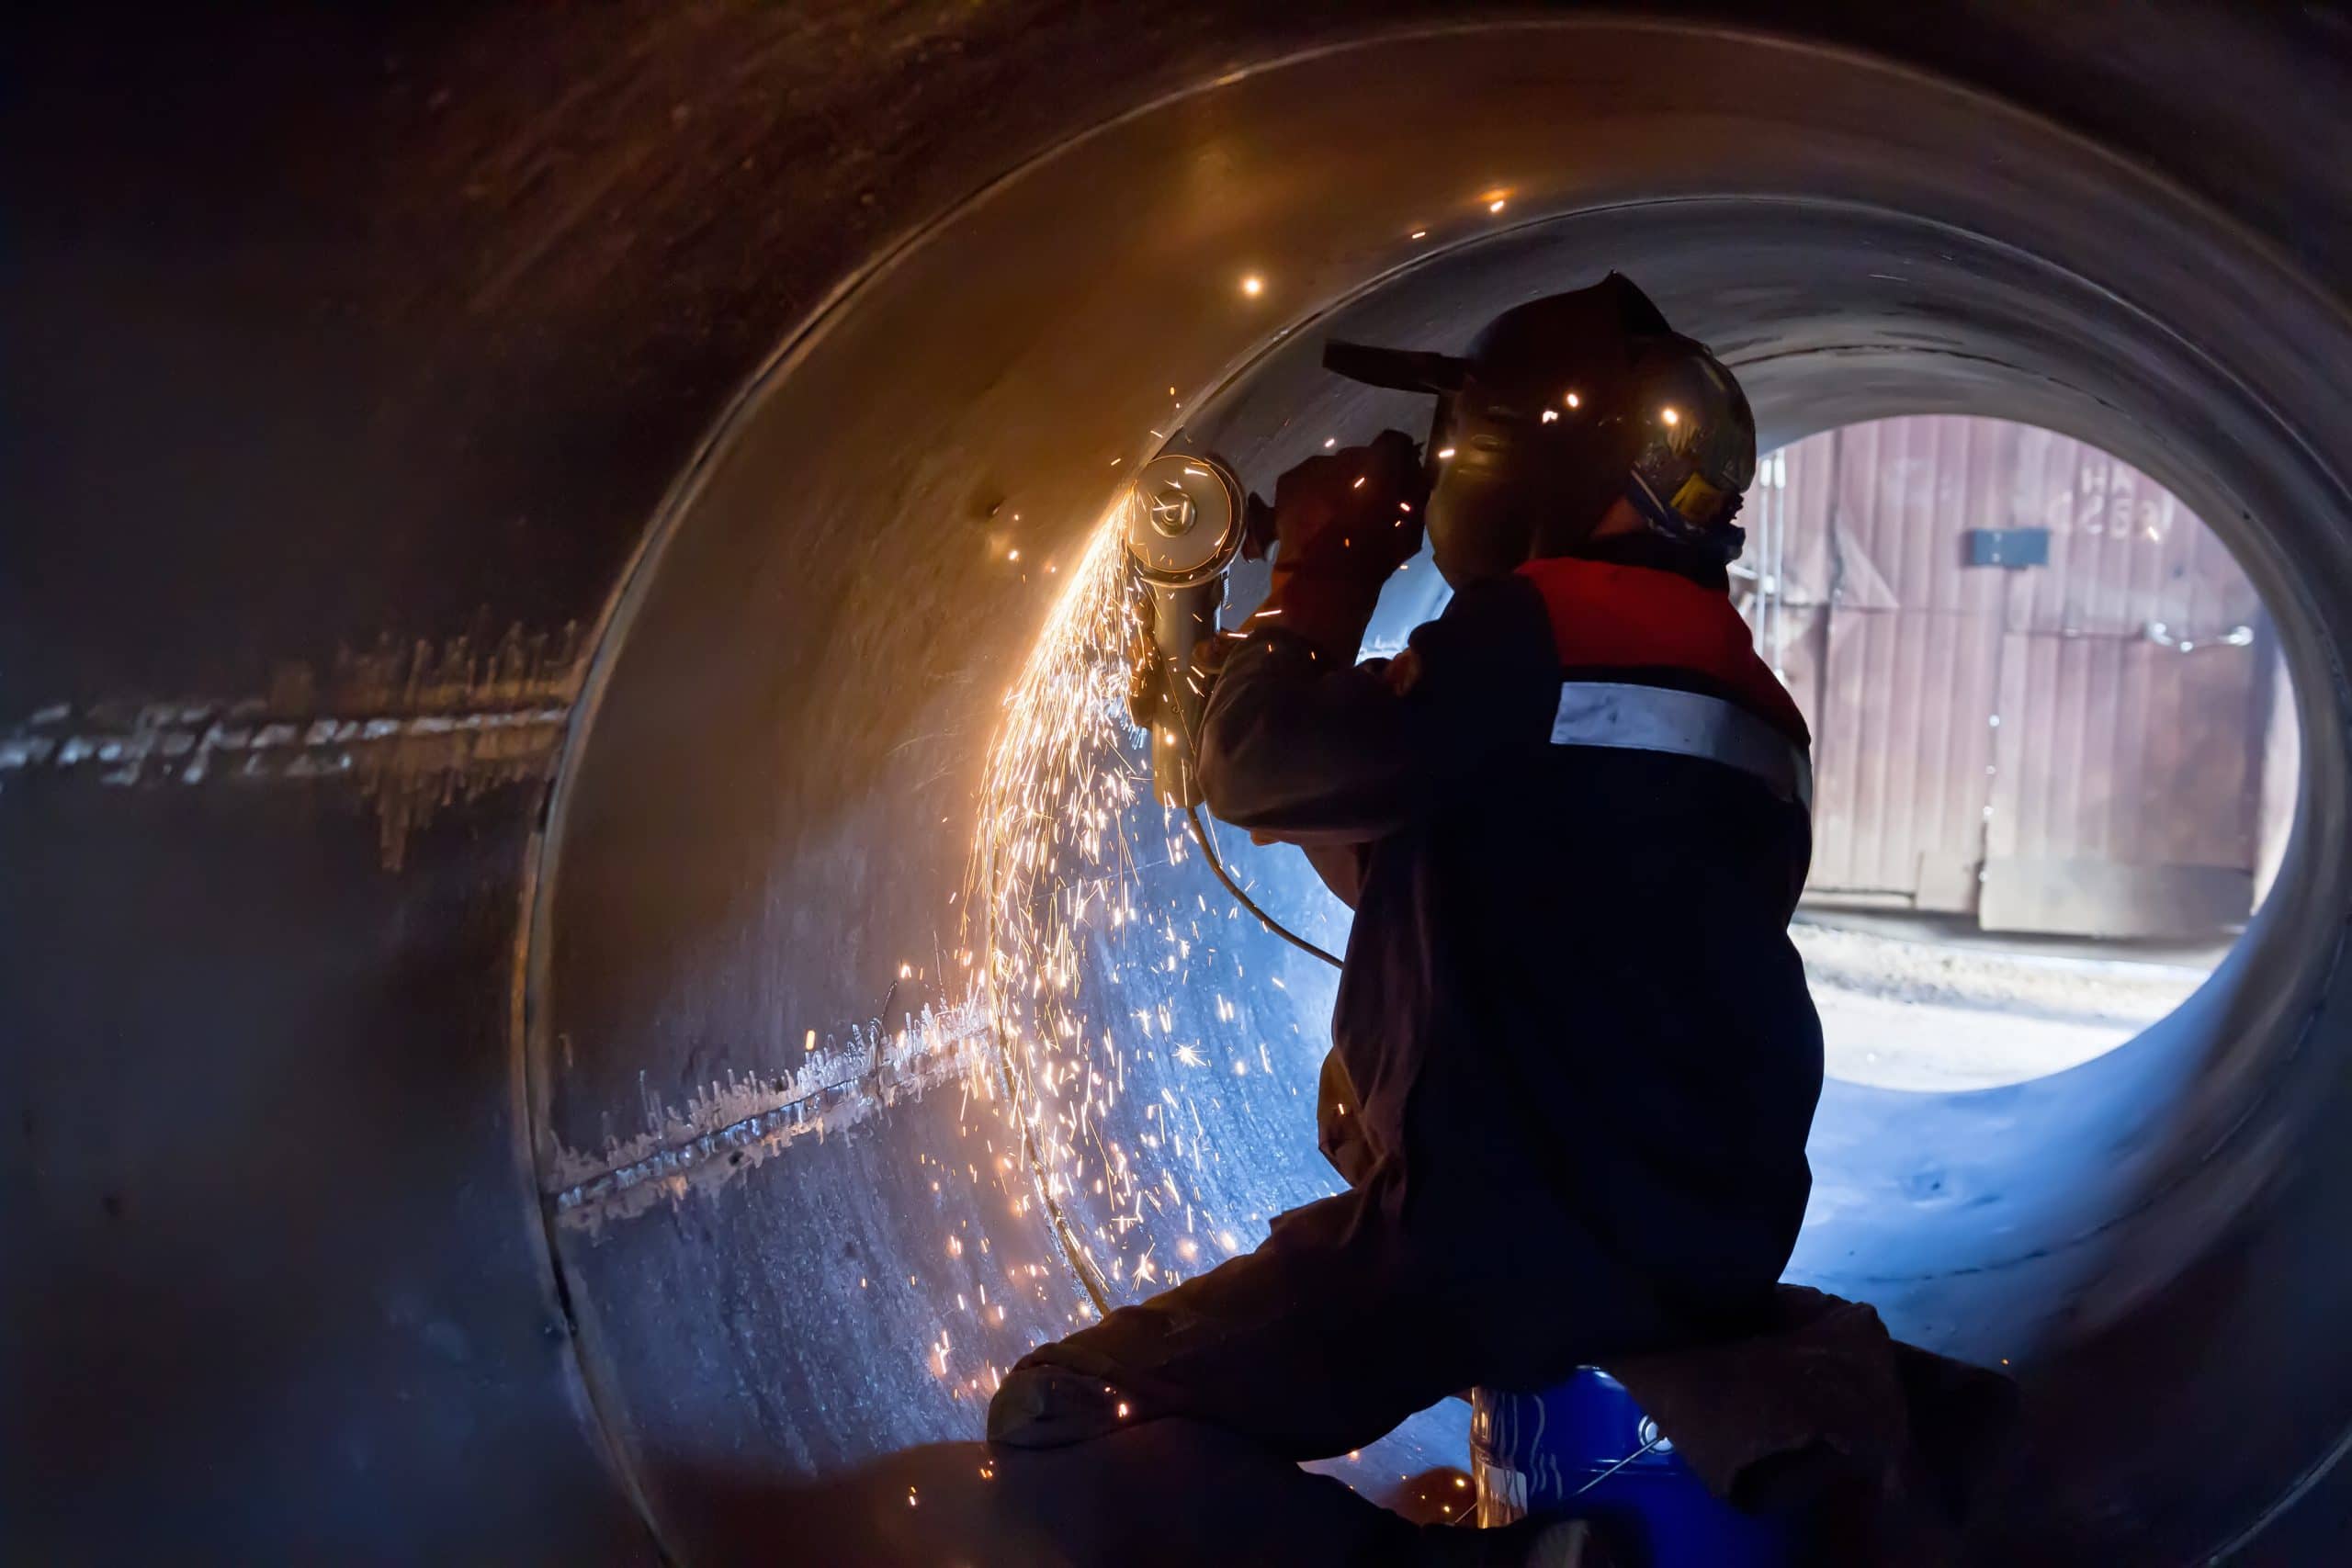 Welder Carries Out Mechanical Cleaning Of Root Surfaces Of Weld Seam